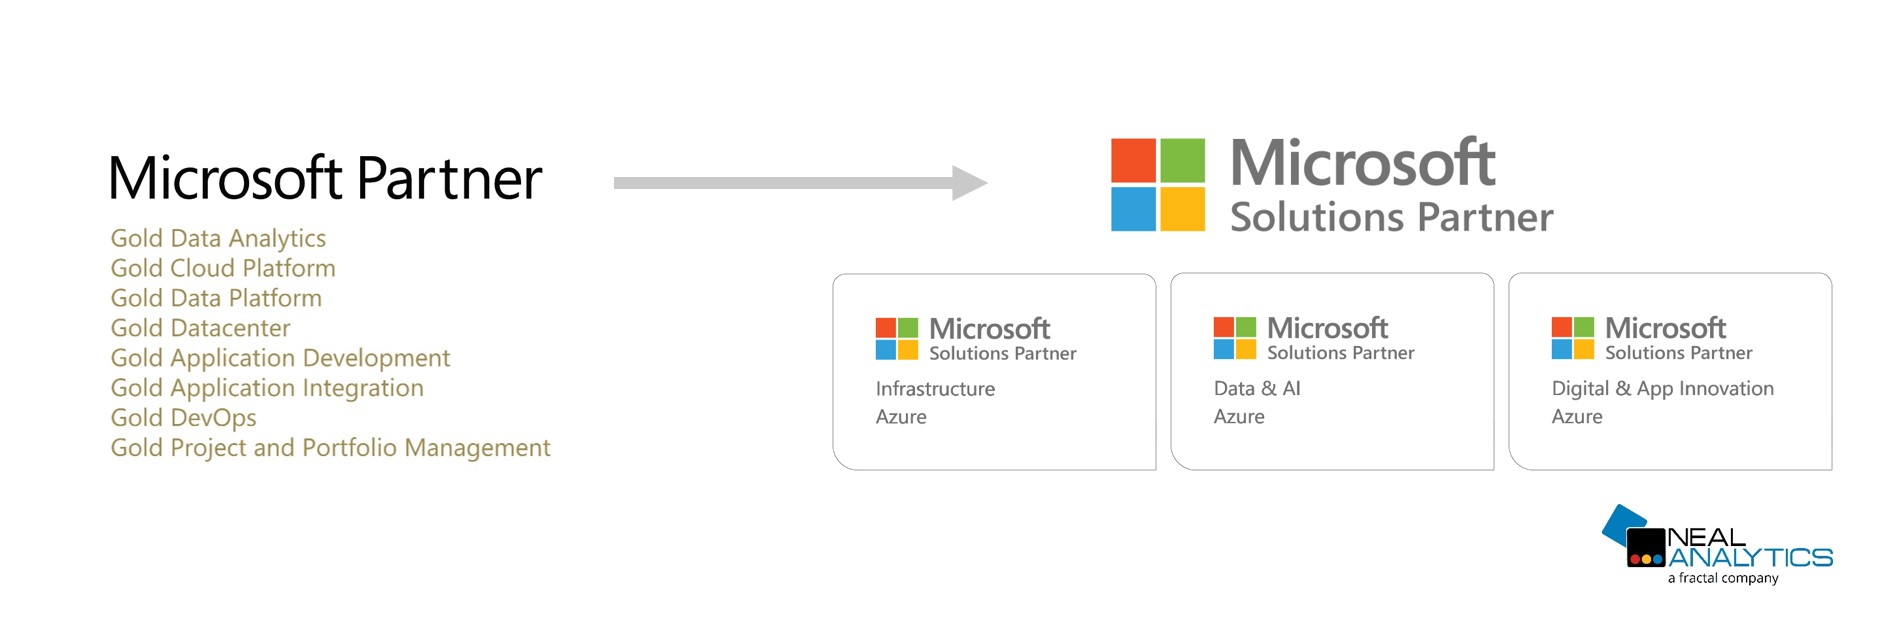 Neal Analytics Microsoft Partner to Microsoft Solutions Partner changes